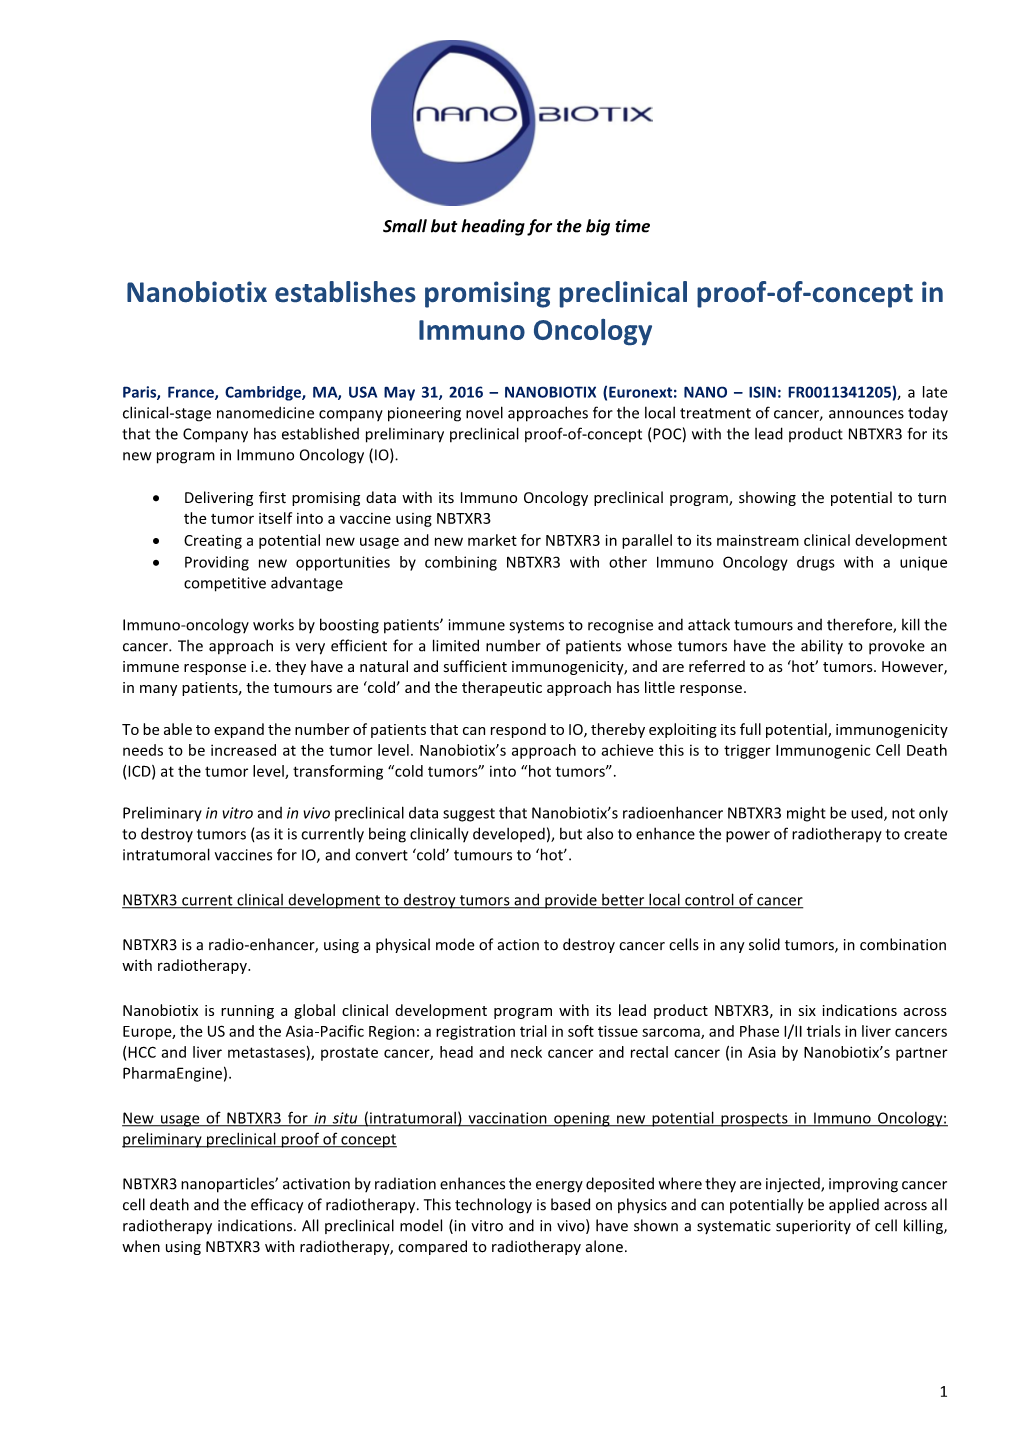 Nanobiotix Establishes Promising Preclinical Proof-Of-Concept in Immuno Oncology